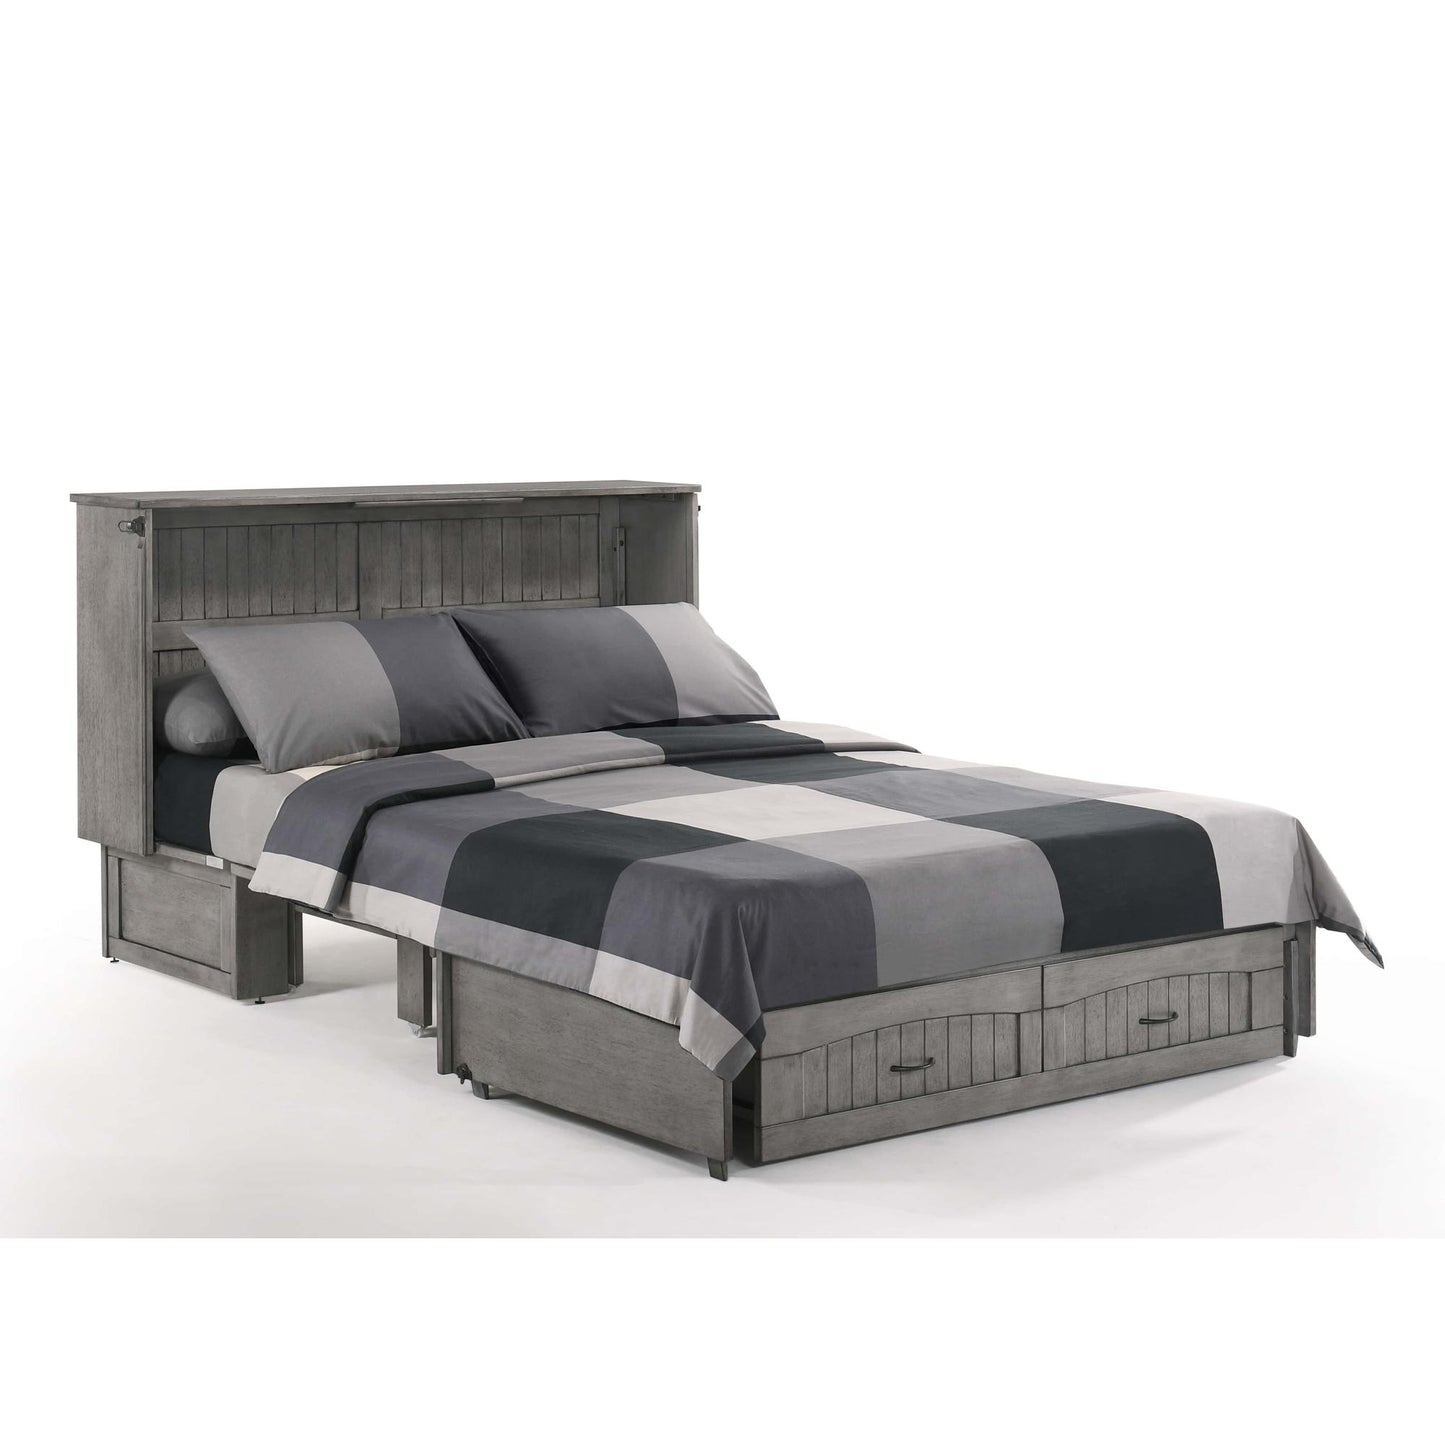 The Alpine Murphy Cabinet Bed in Rustic Gray